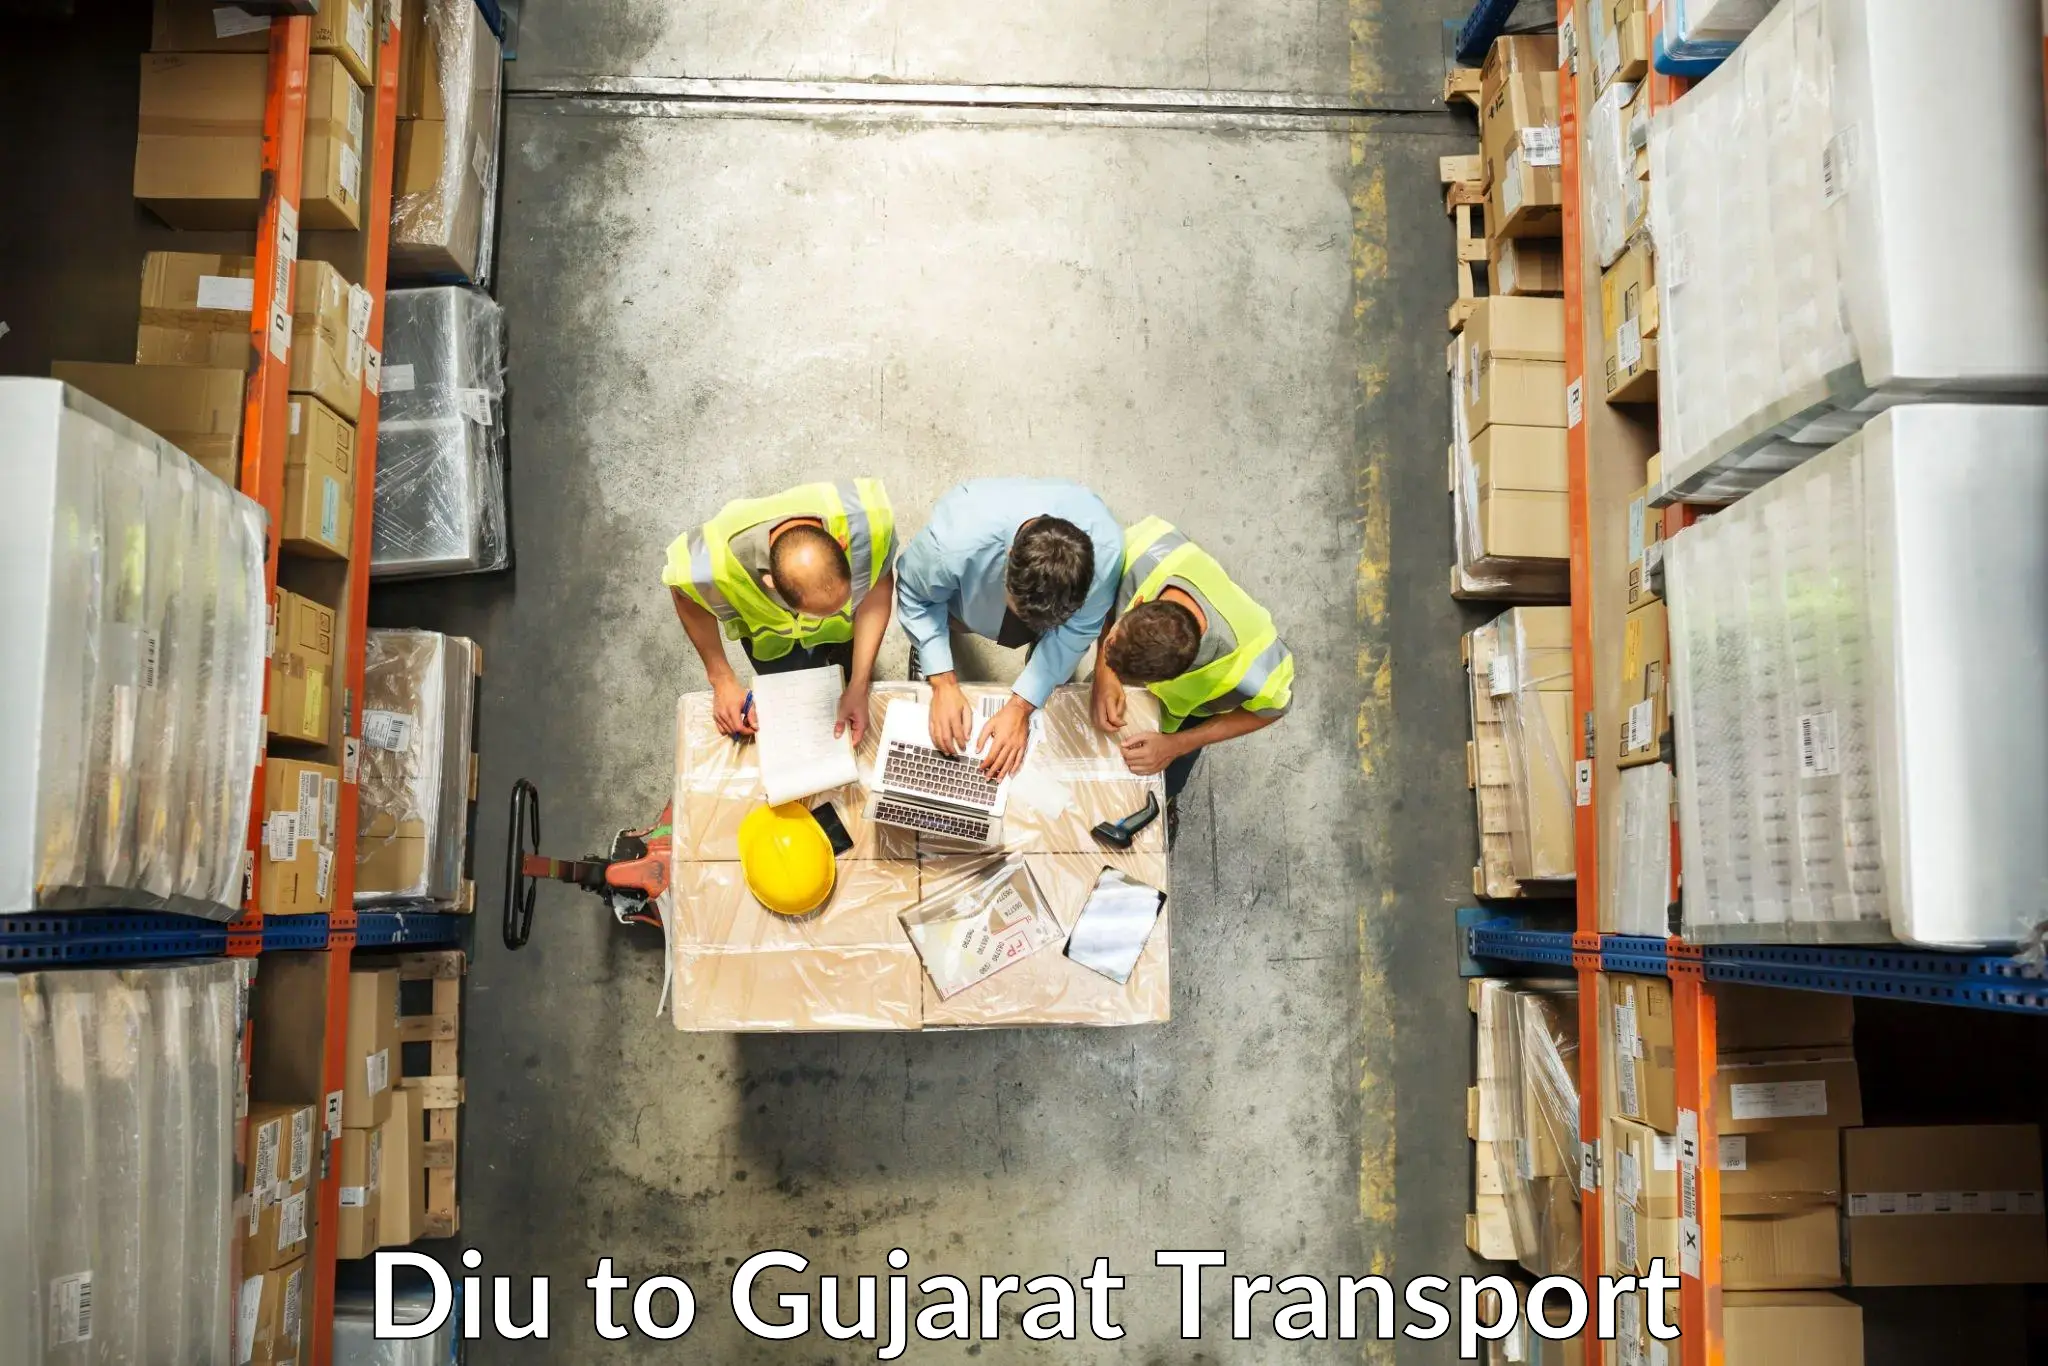 Transport bike from one state to another Diu to Dabhoi